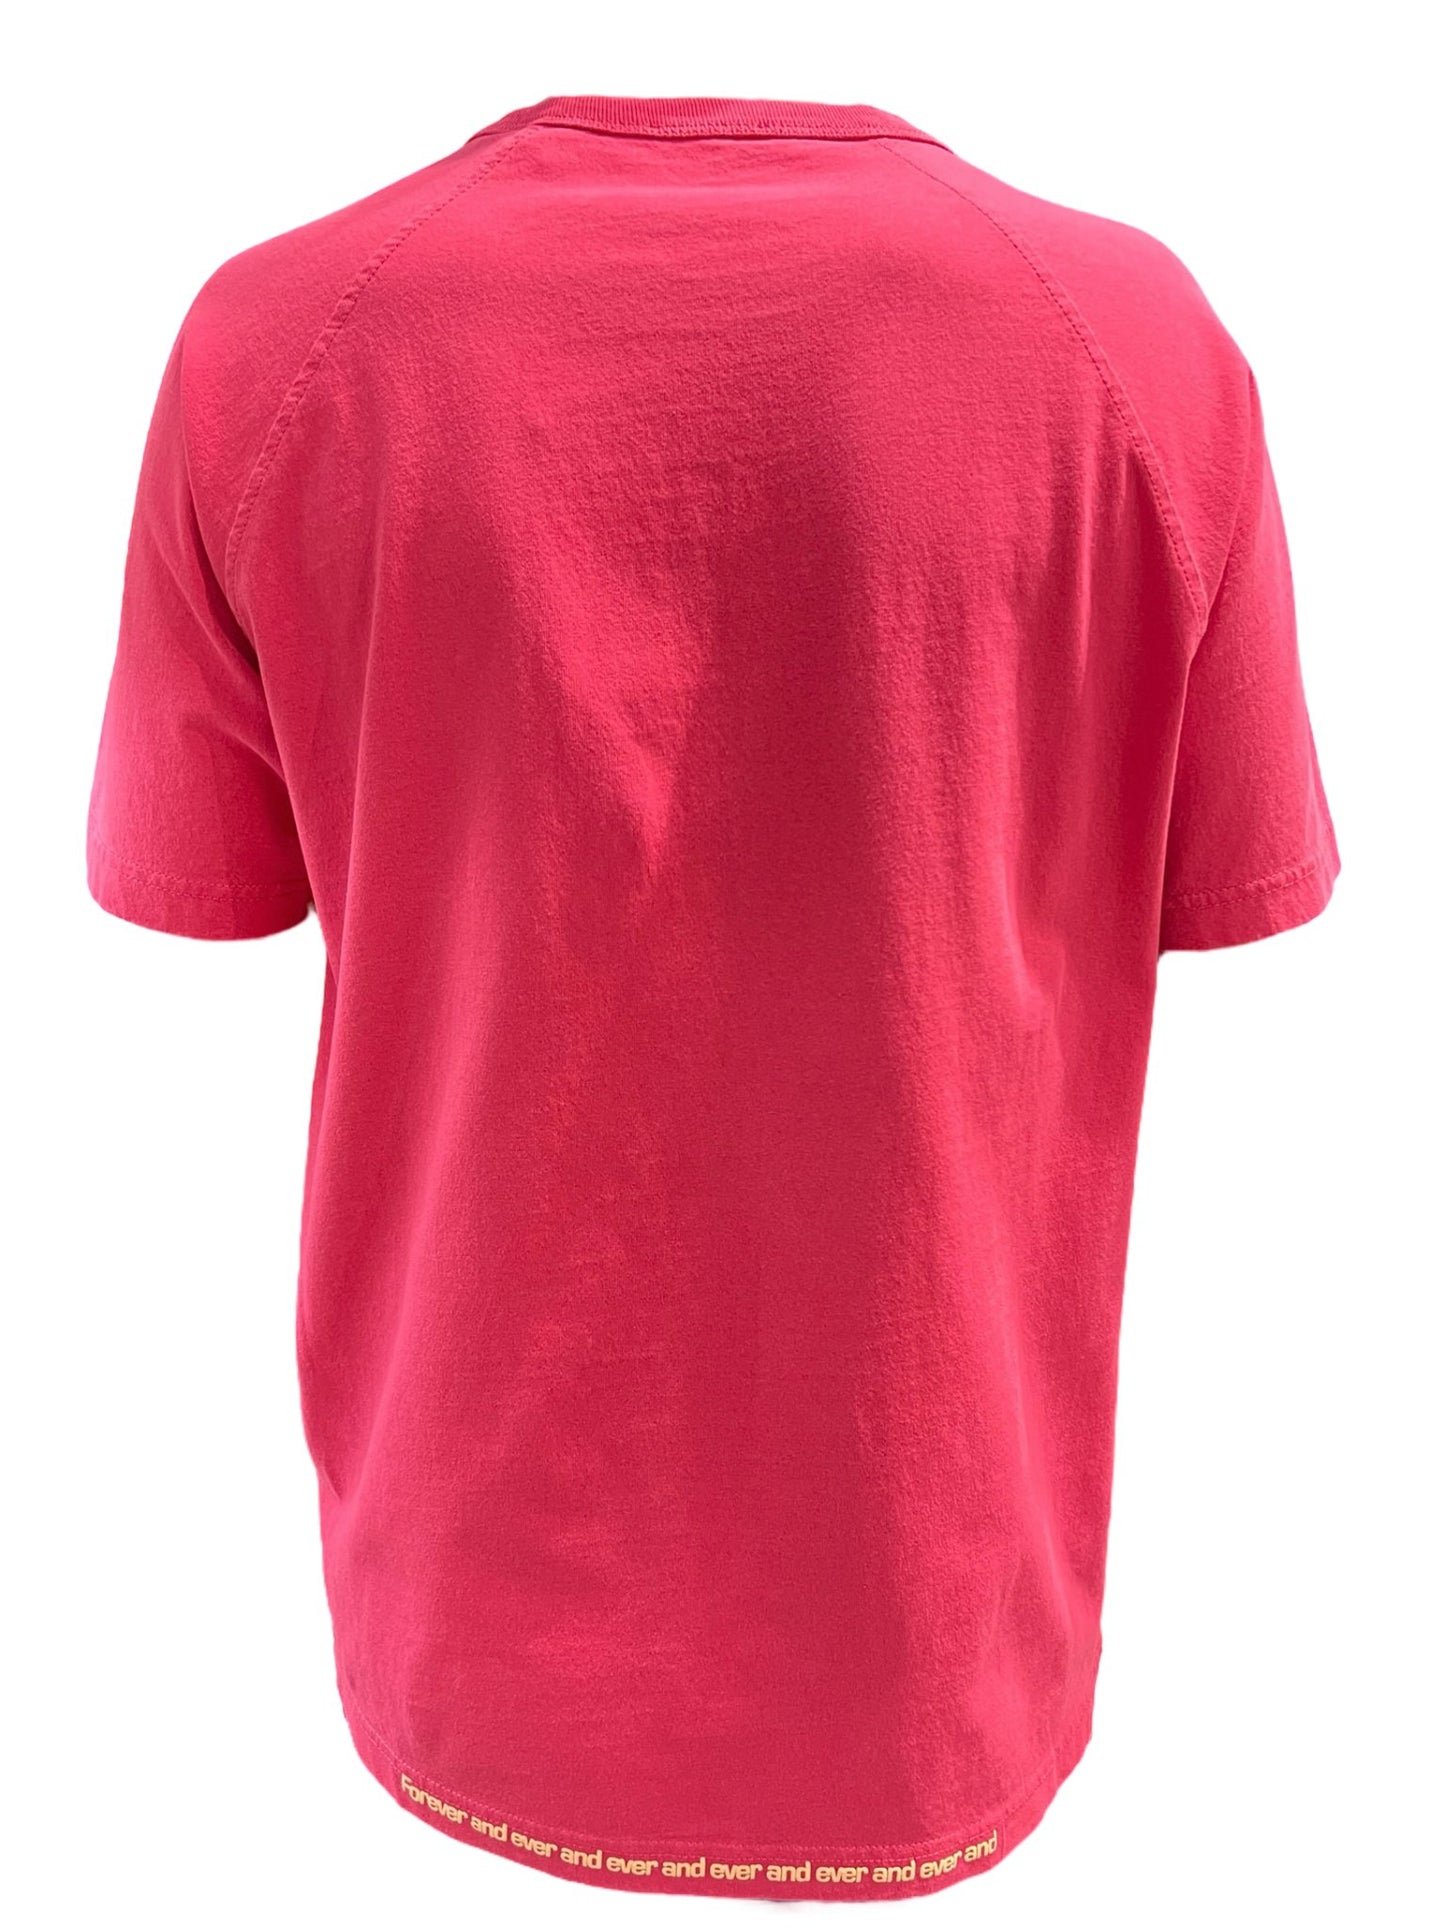 Rear view of a person wearing a pink DIESEL T-RUST T-SHIRT BABY PINK with repeated text along the lower hem.